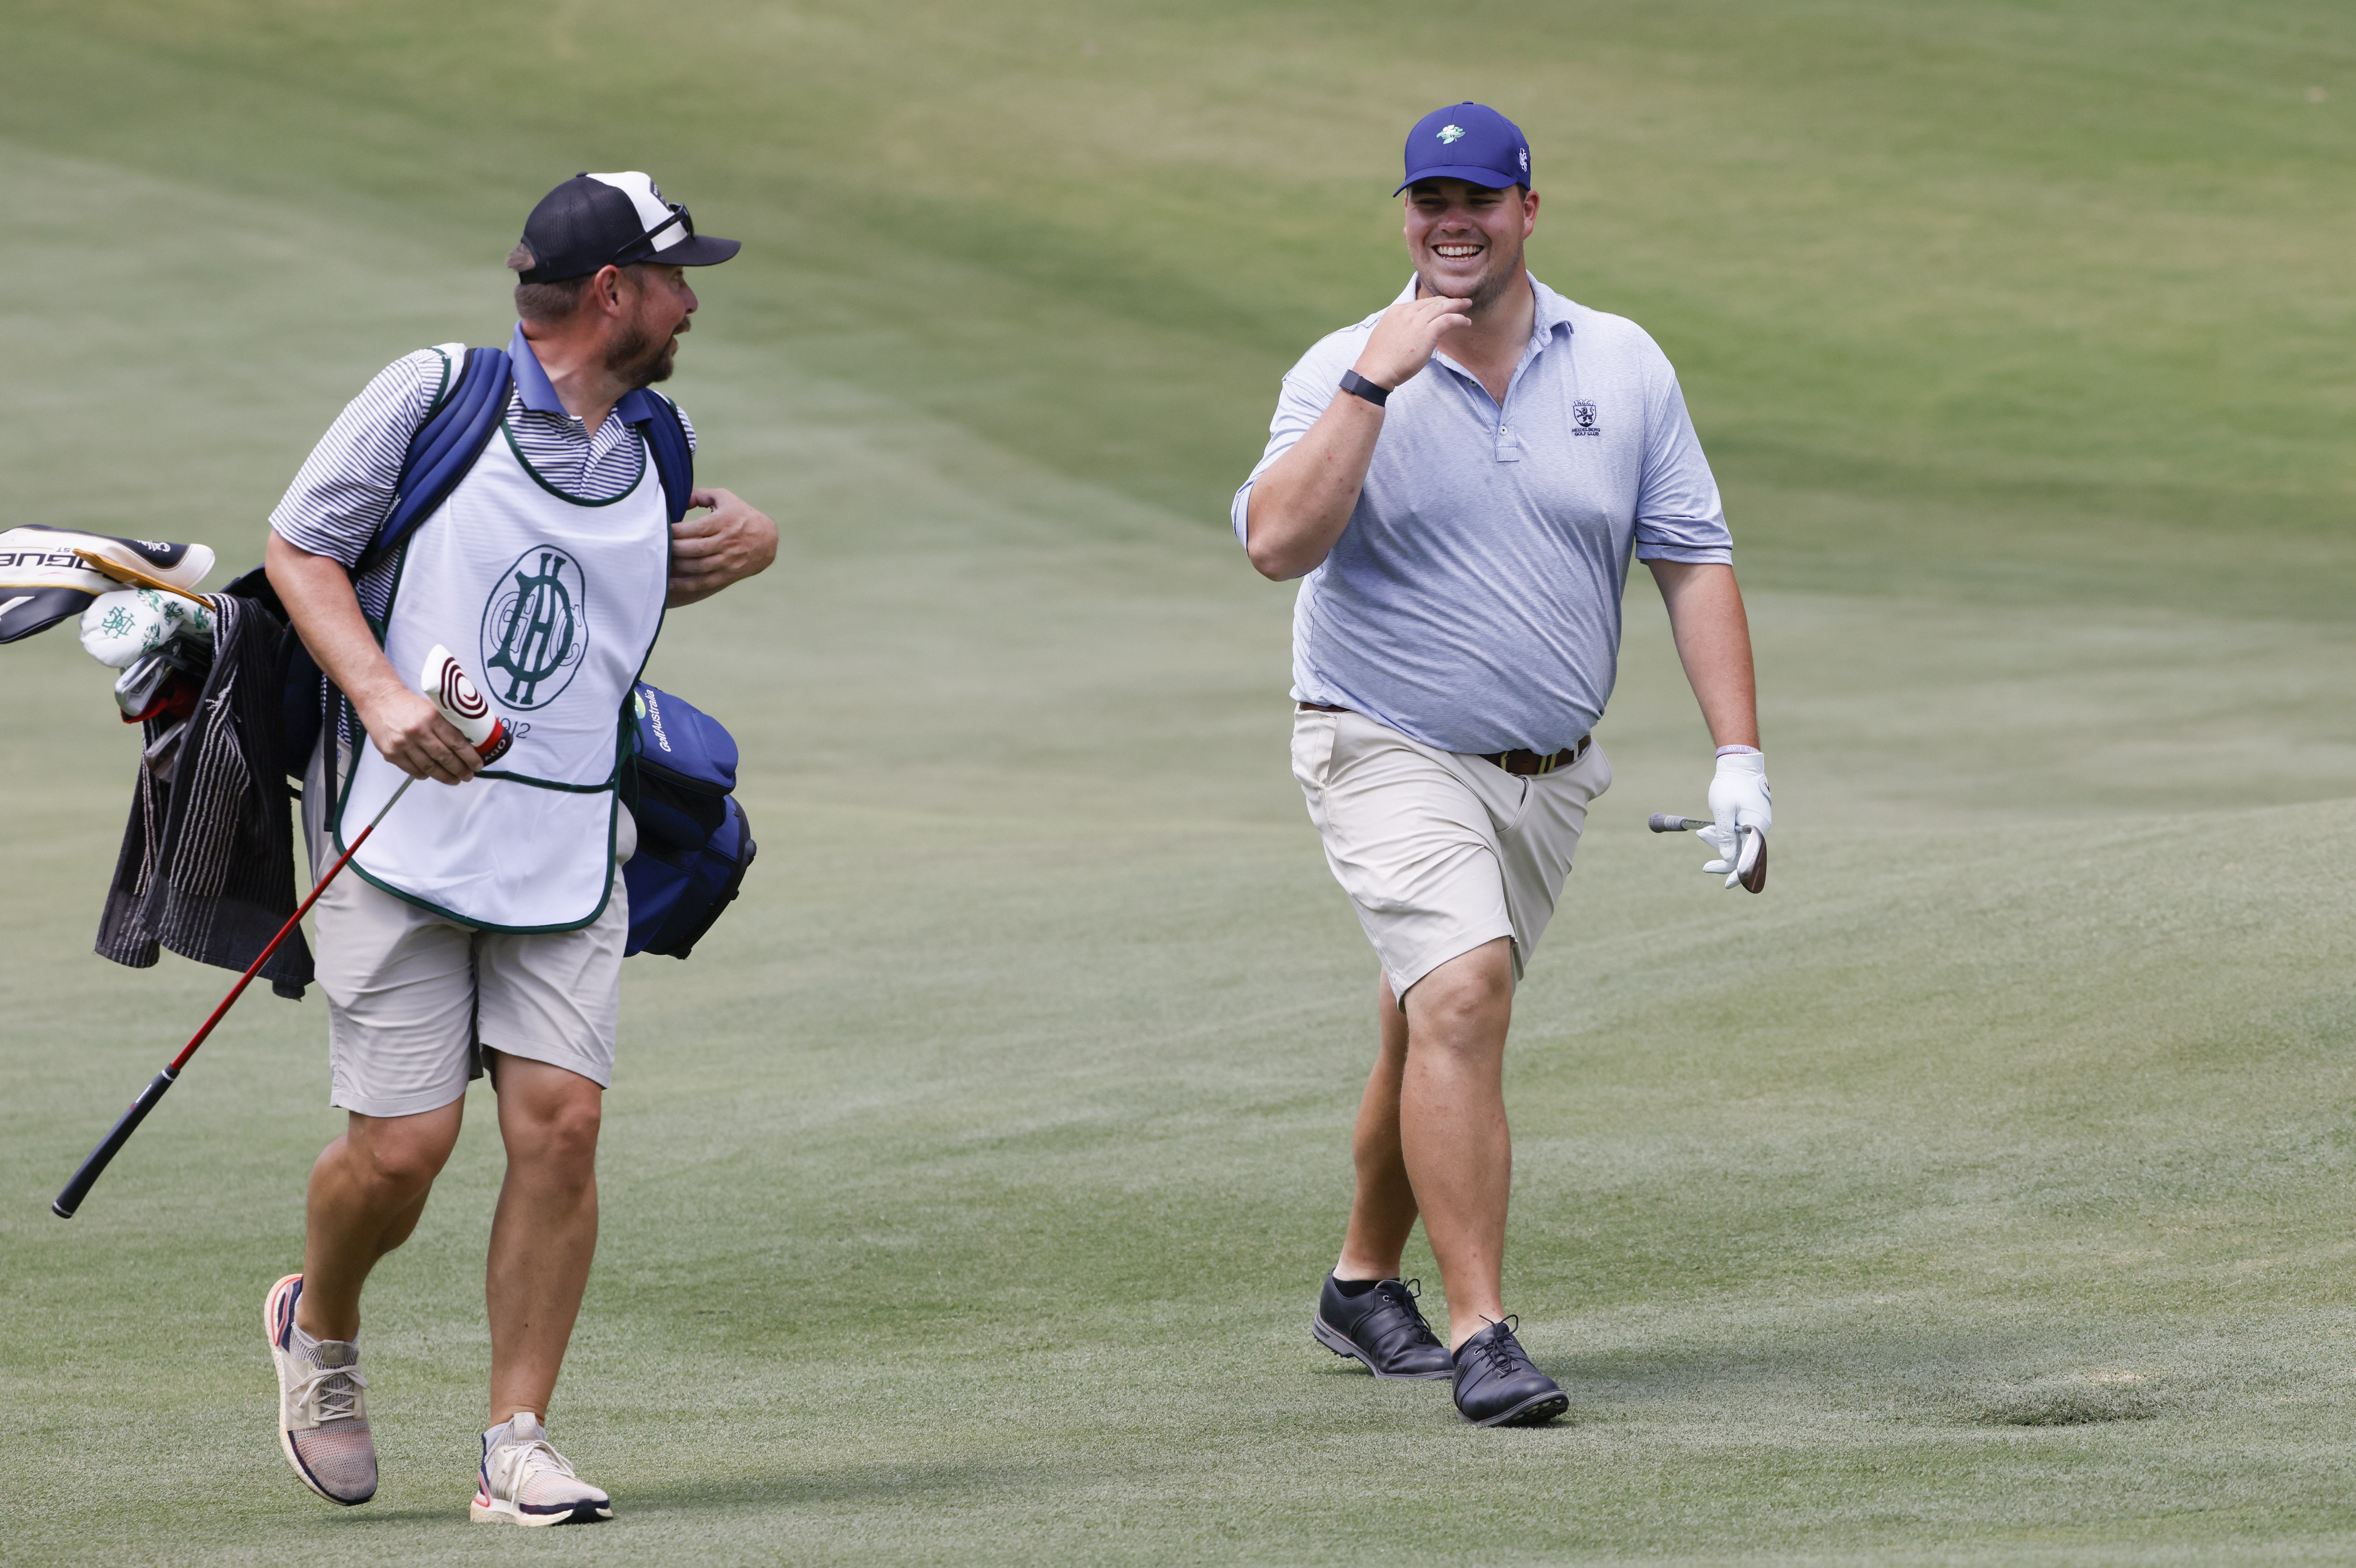 Golfer Toby Walker continues Australian tradition at Dogwood Invitational